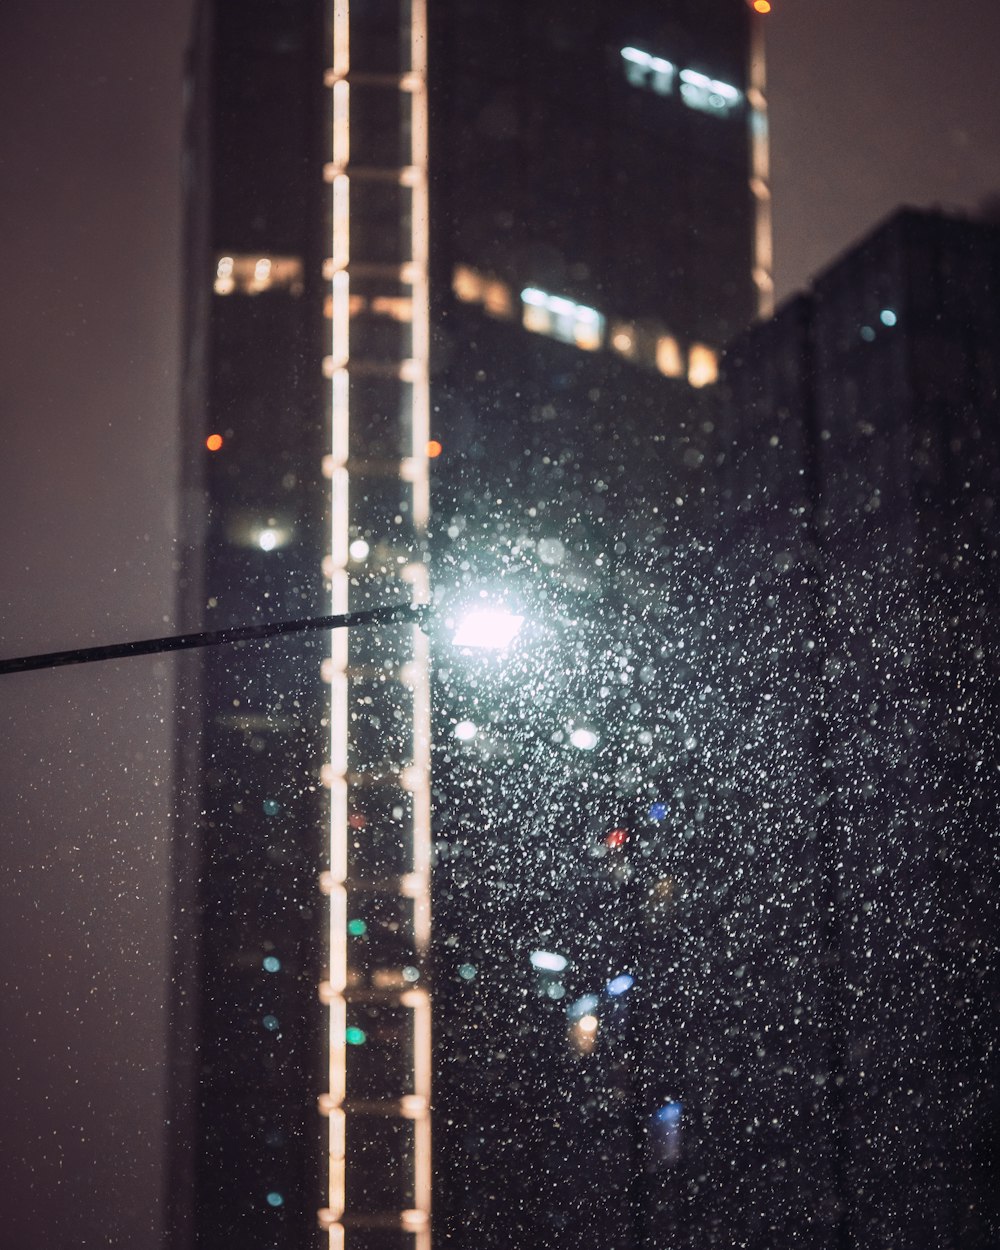 a view of a tall building at night through a window